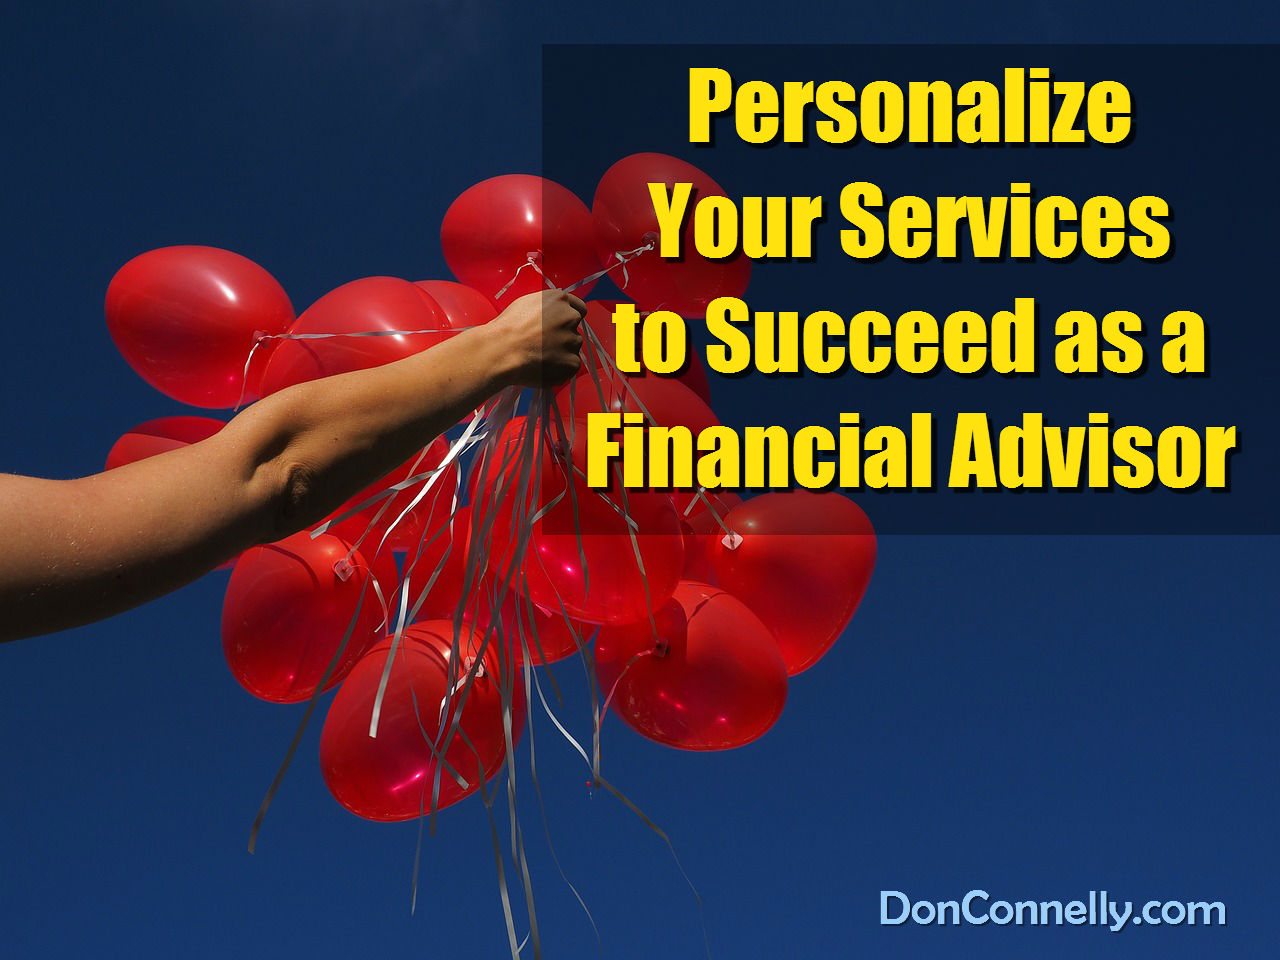 Personalizing Your Services Will Help You Succeed as a Financial Advisor